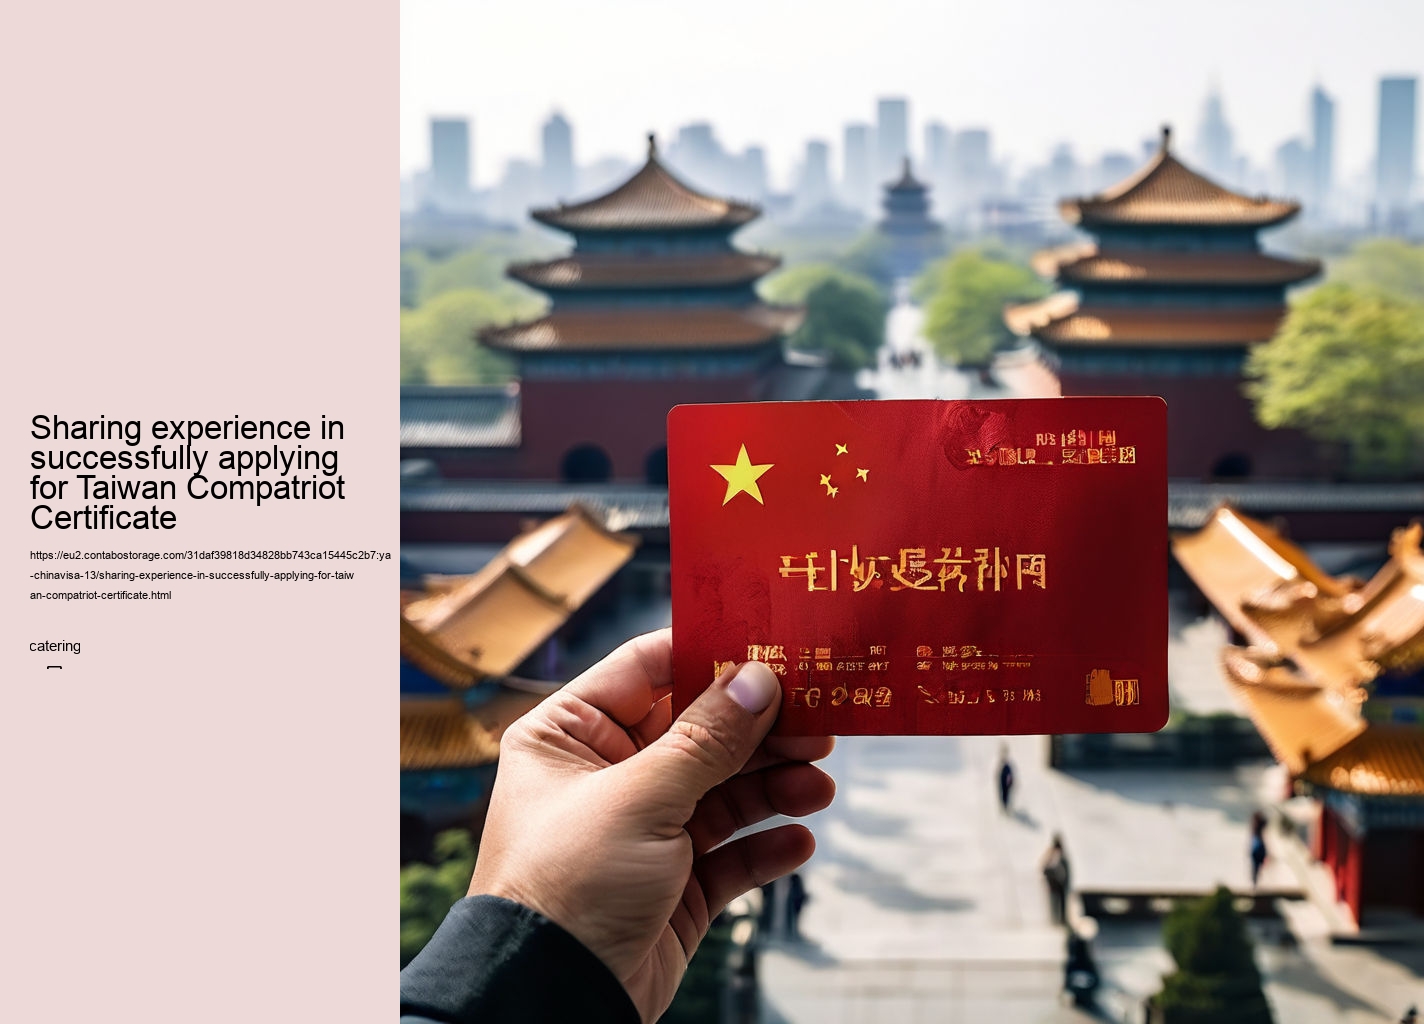 Sharing experience in successfully applying for Taiwan Compatriot Certificate